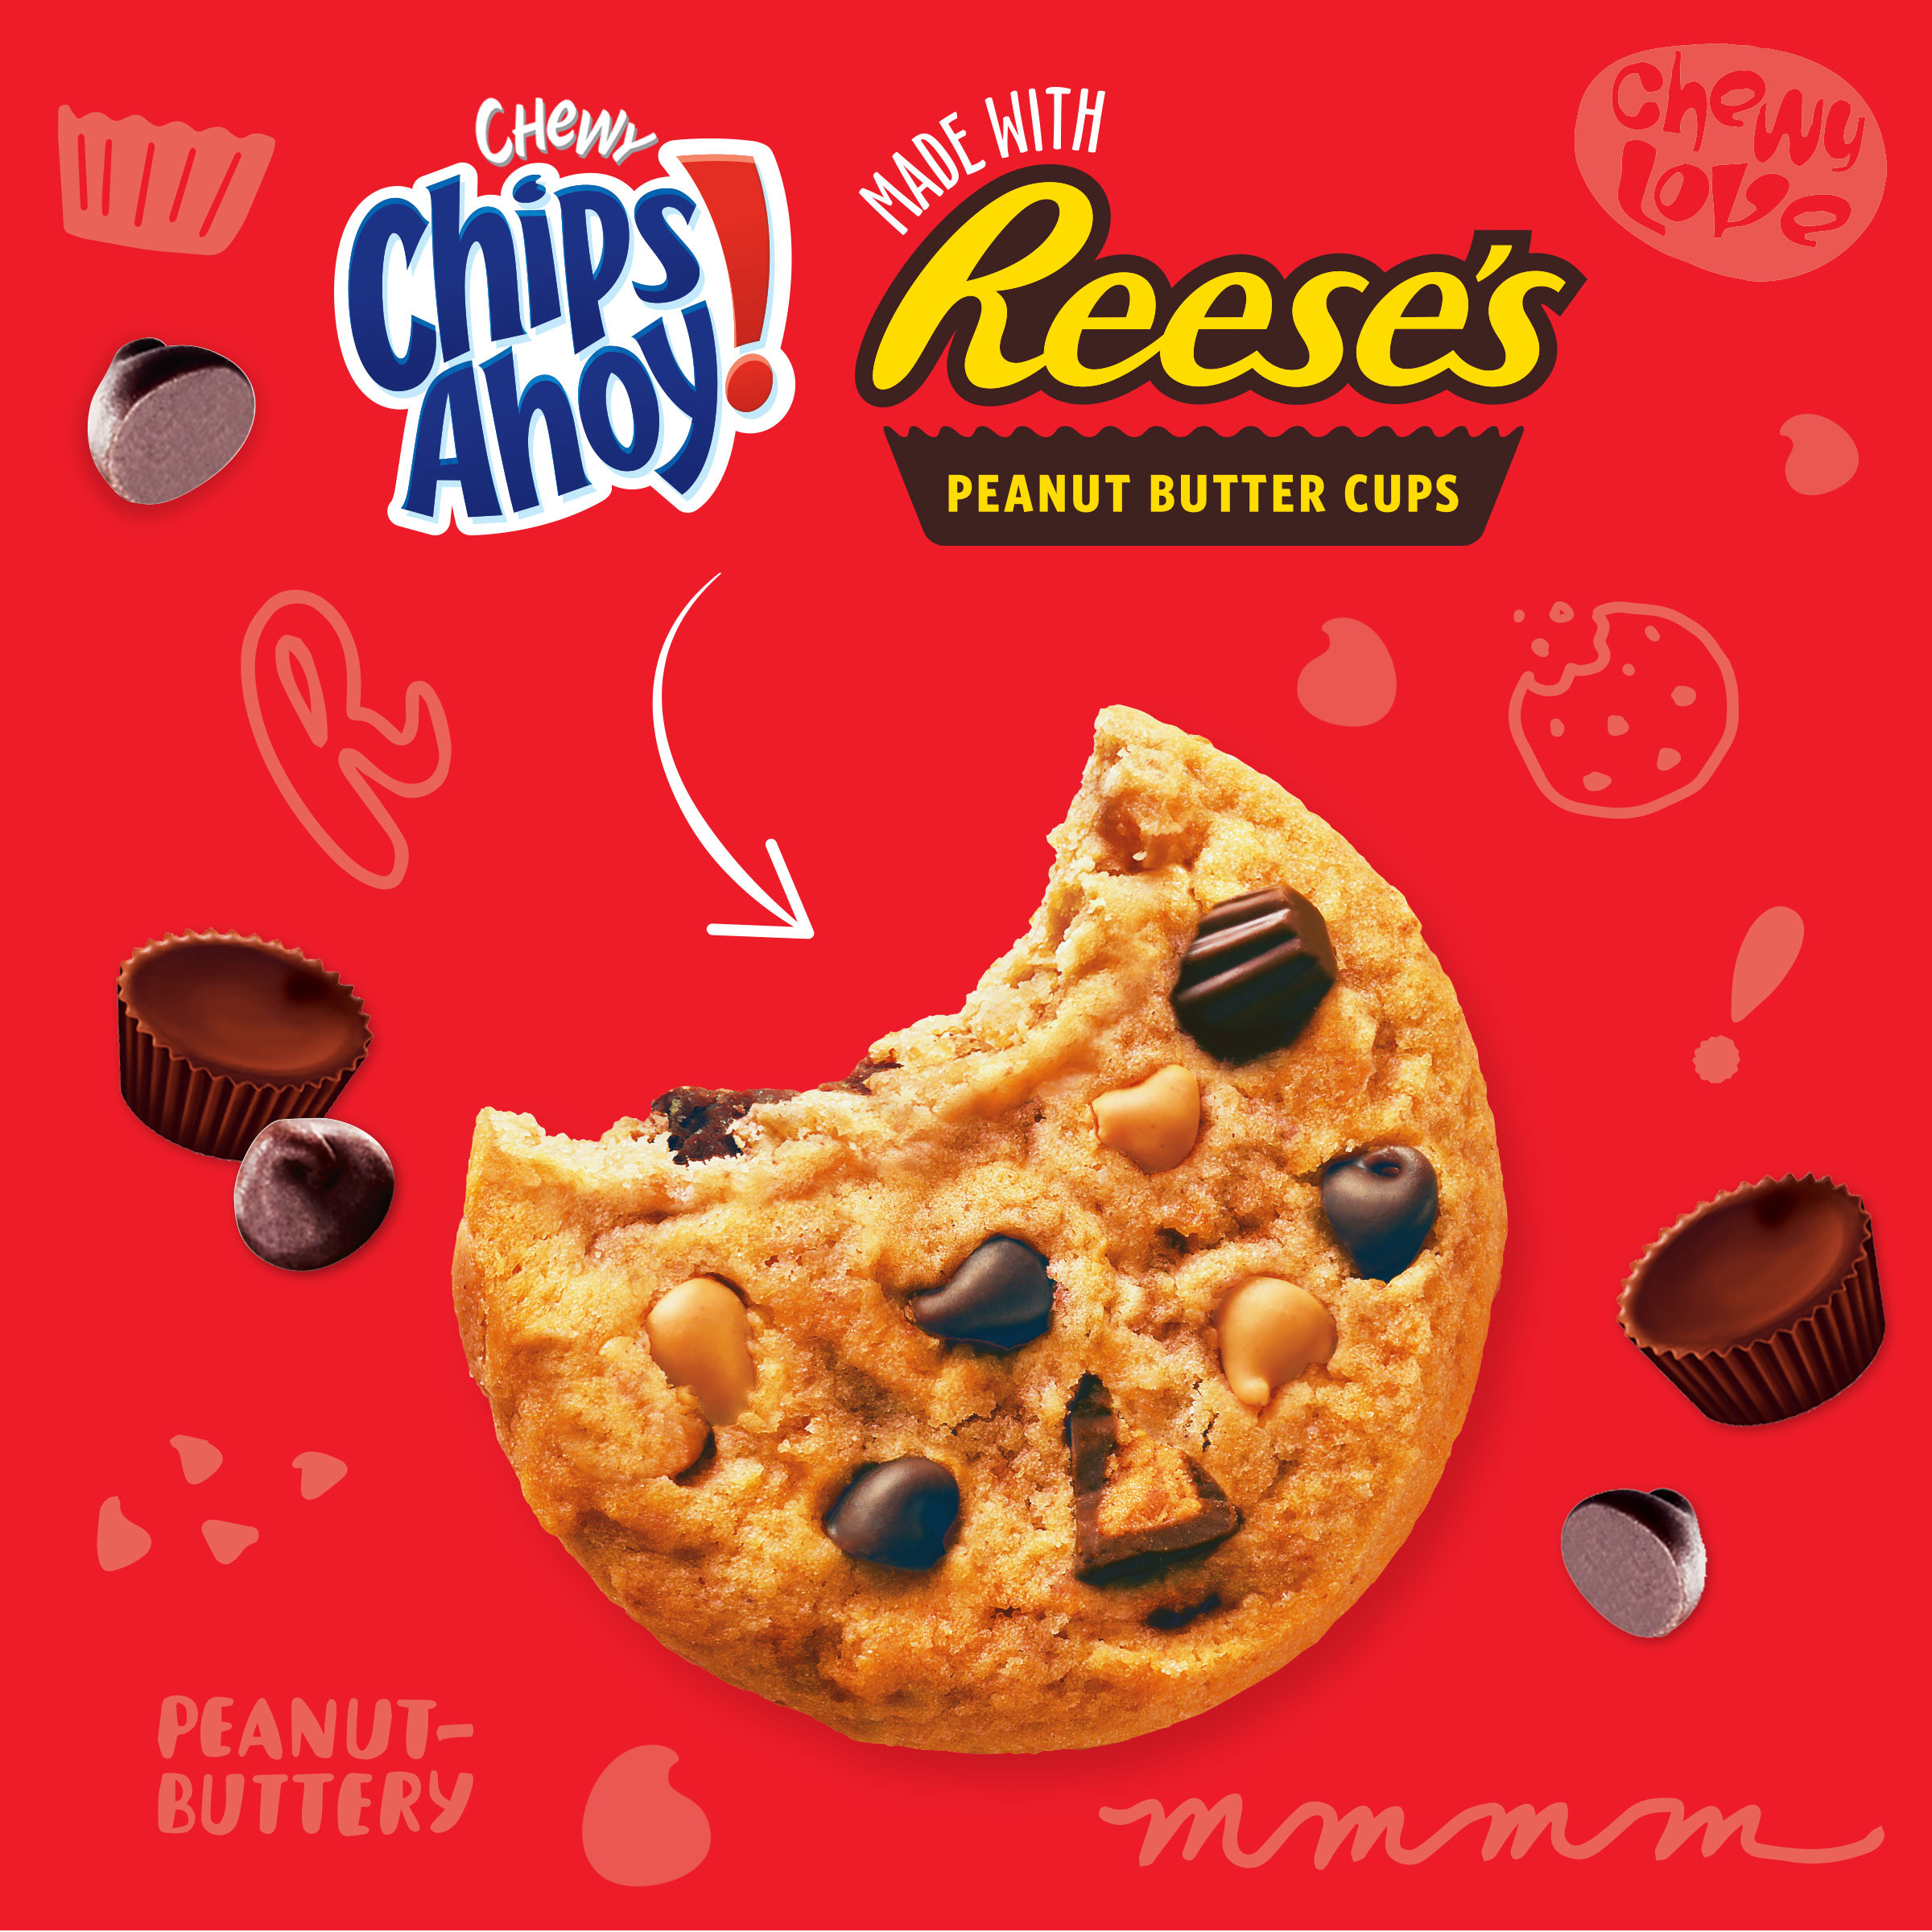 Chips Ahoy! Chewy Chocolate Chip Cookies With Reese'S Peanut Butter Cups, 9.5 Oz - image 3 of 10